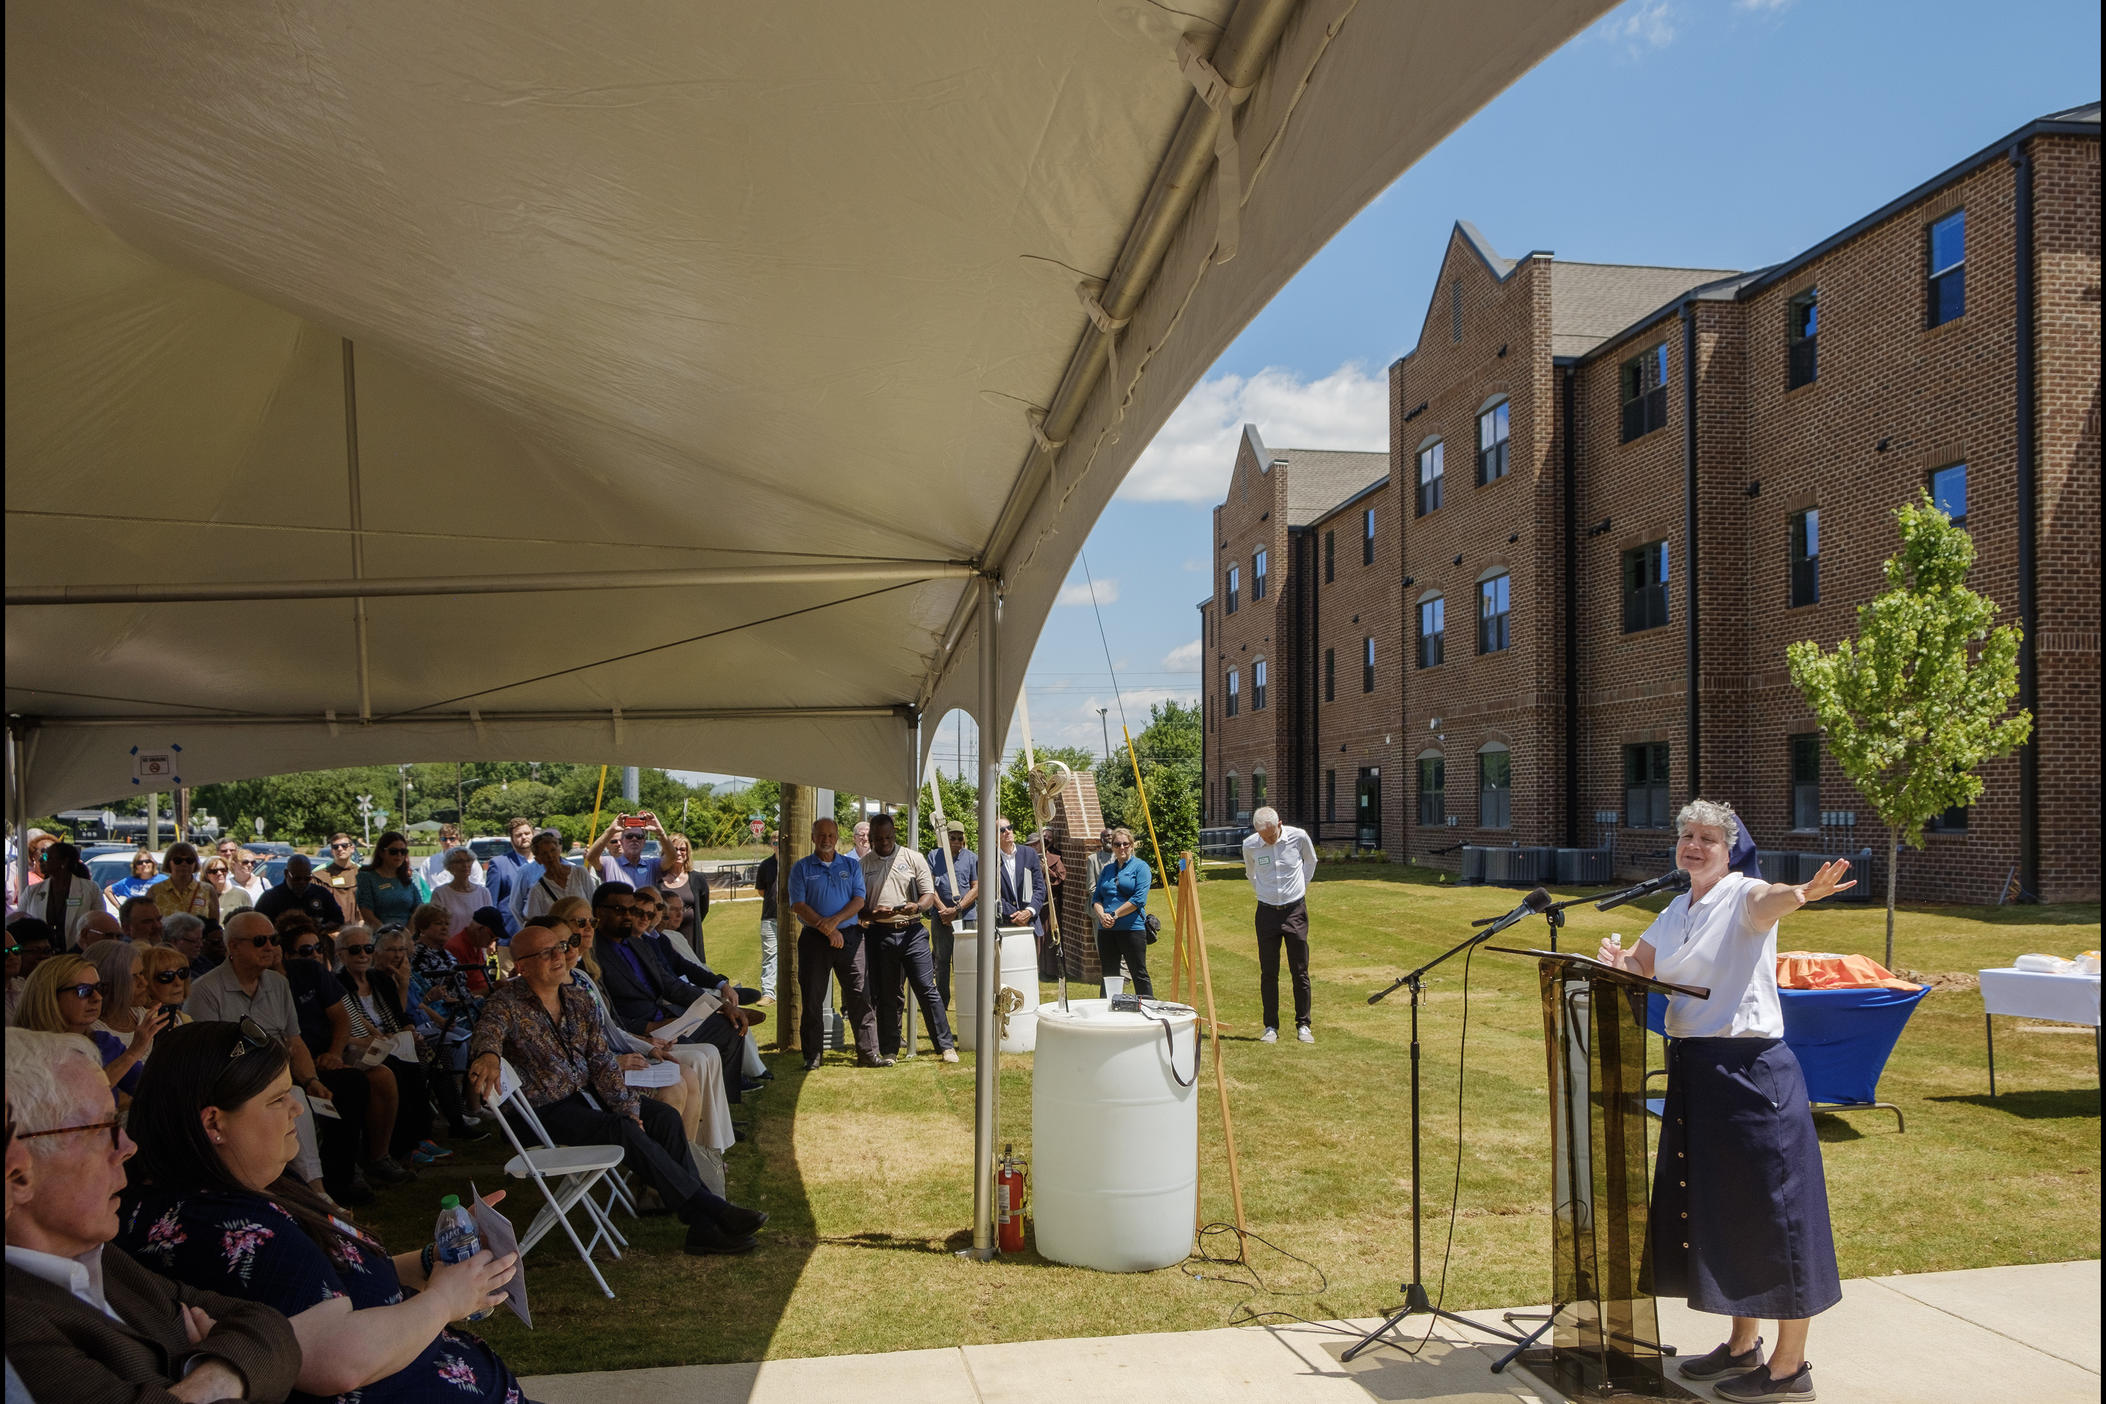 Sister Theresa Sullivan, right, speaks during the ceremony Monday marking the near completion of Macon's Central City Apartments.